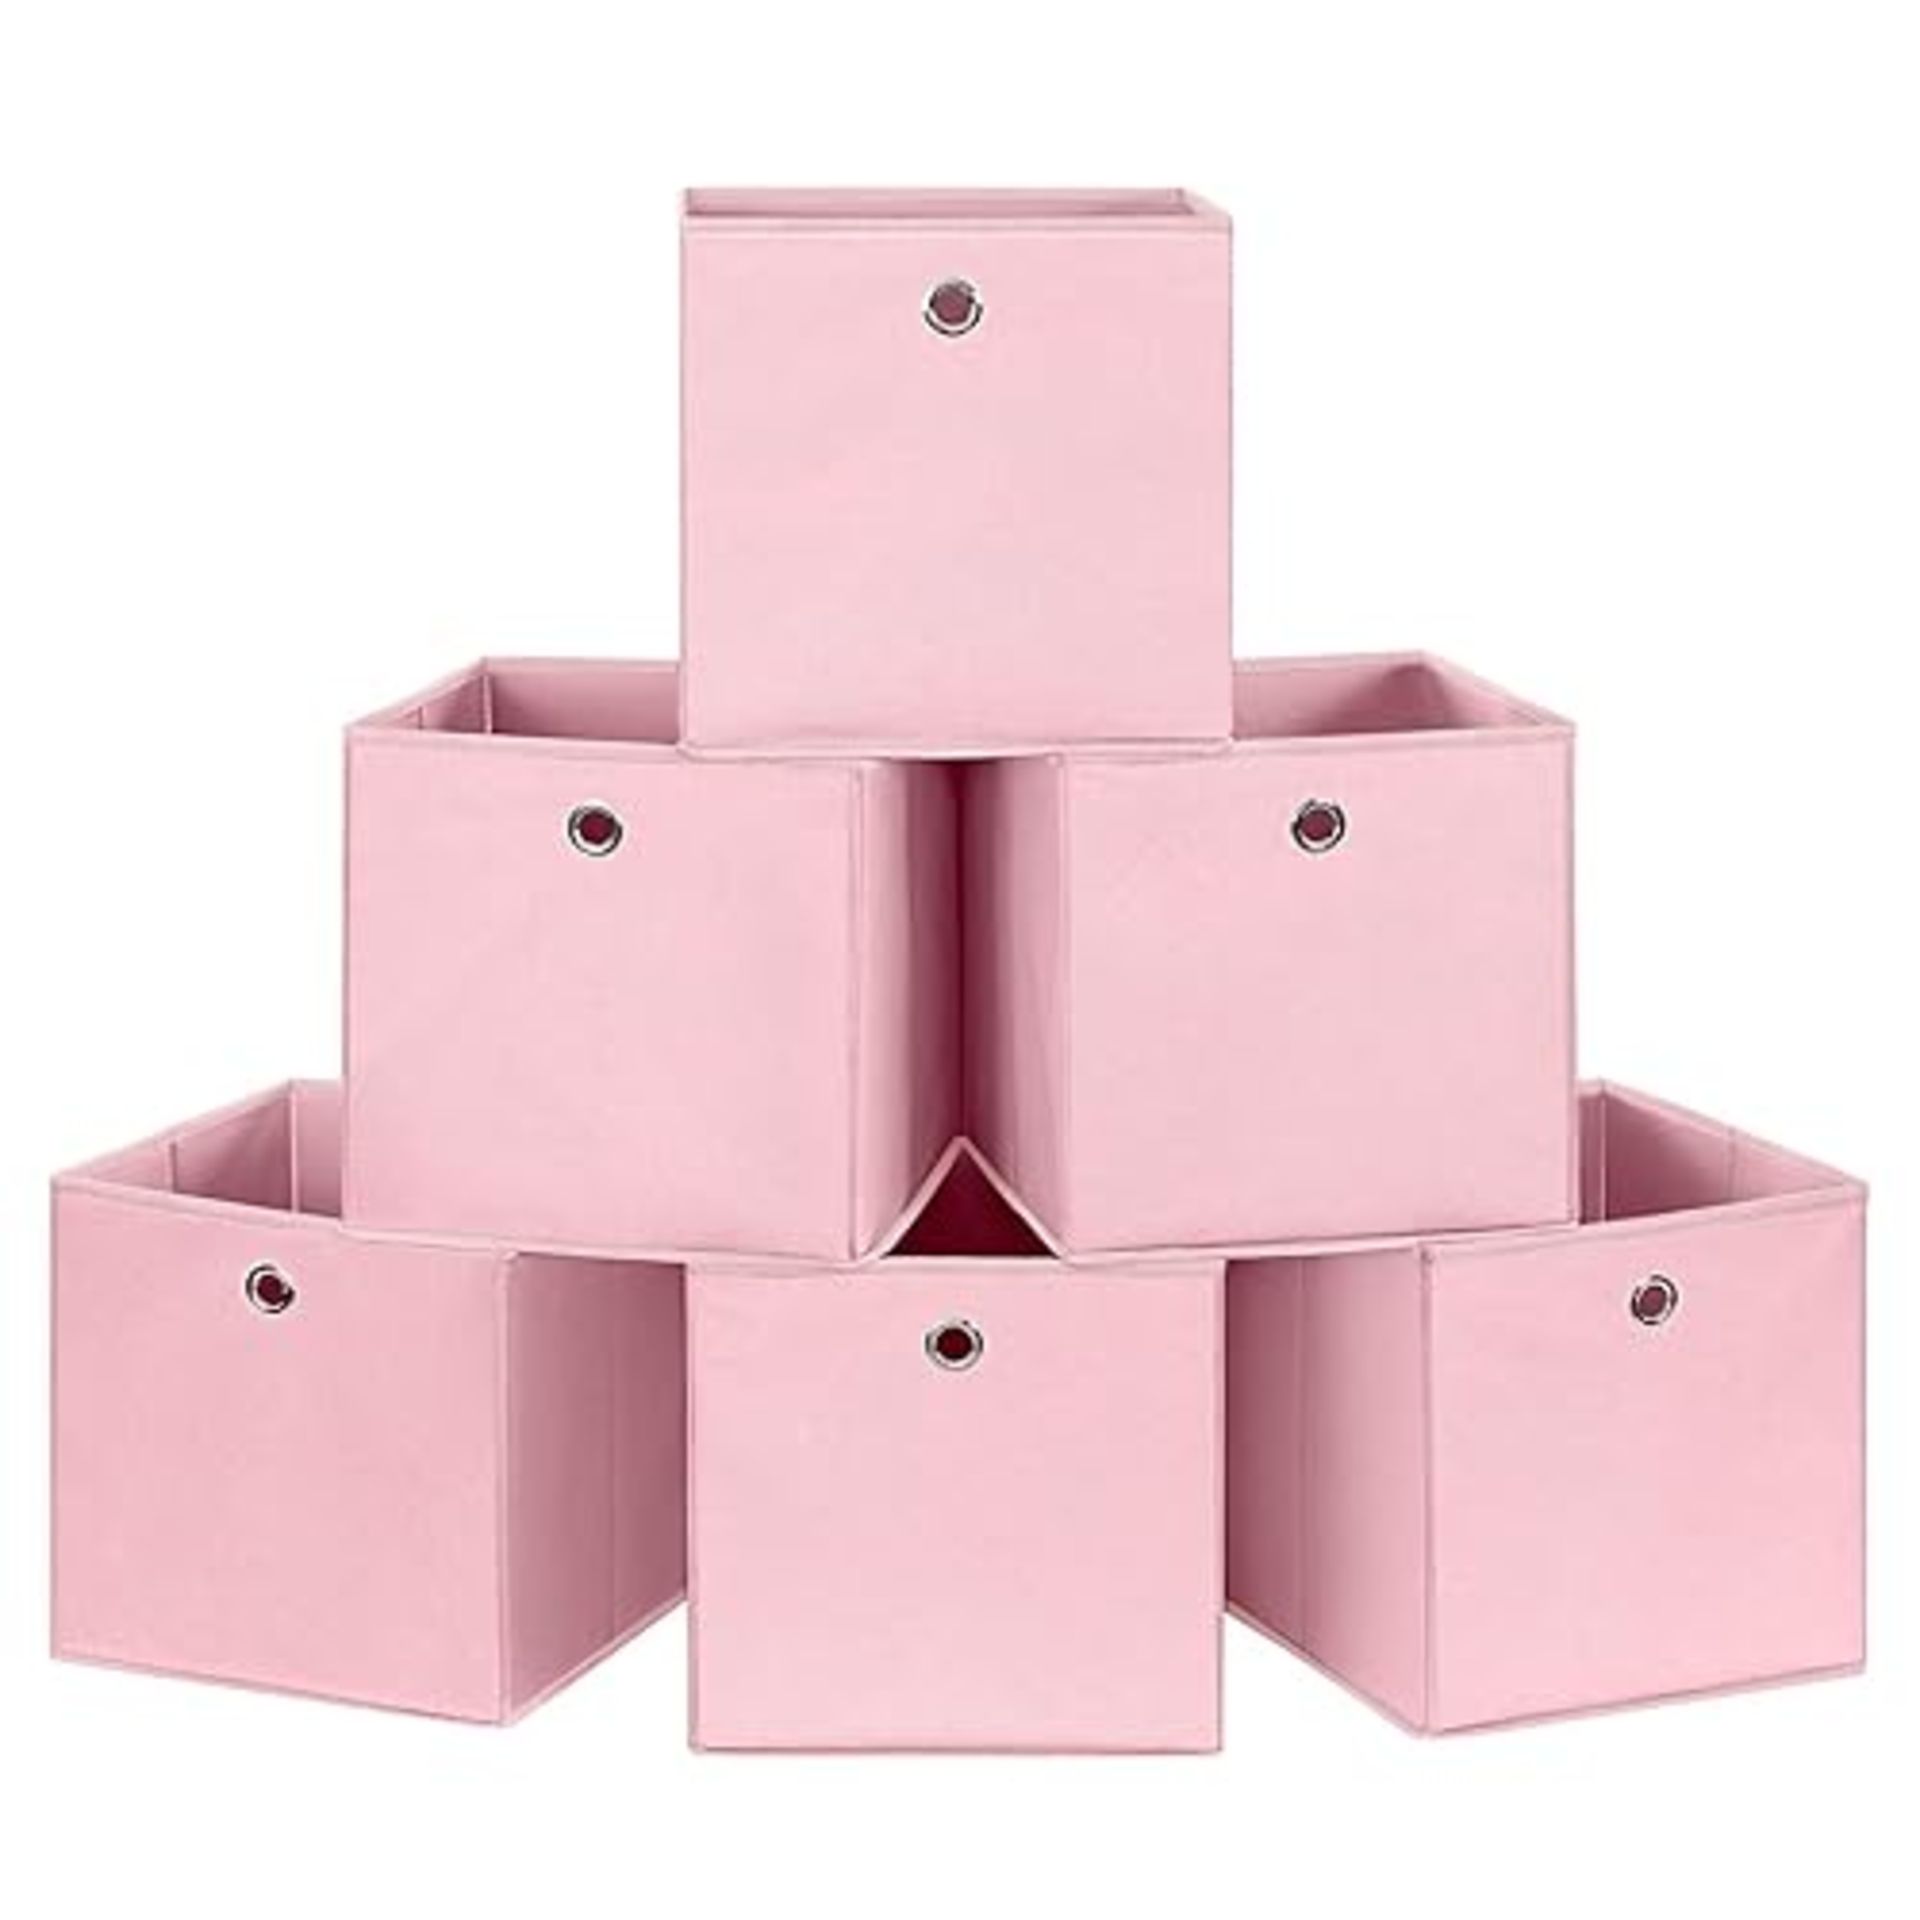 SONGMICS Set of 6 Foldable Storage Boxes, Fabric Storage Cubes, Clothes Organiser, Toy Bins with Gr